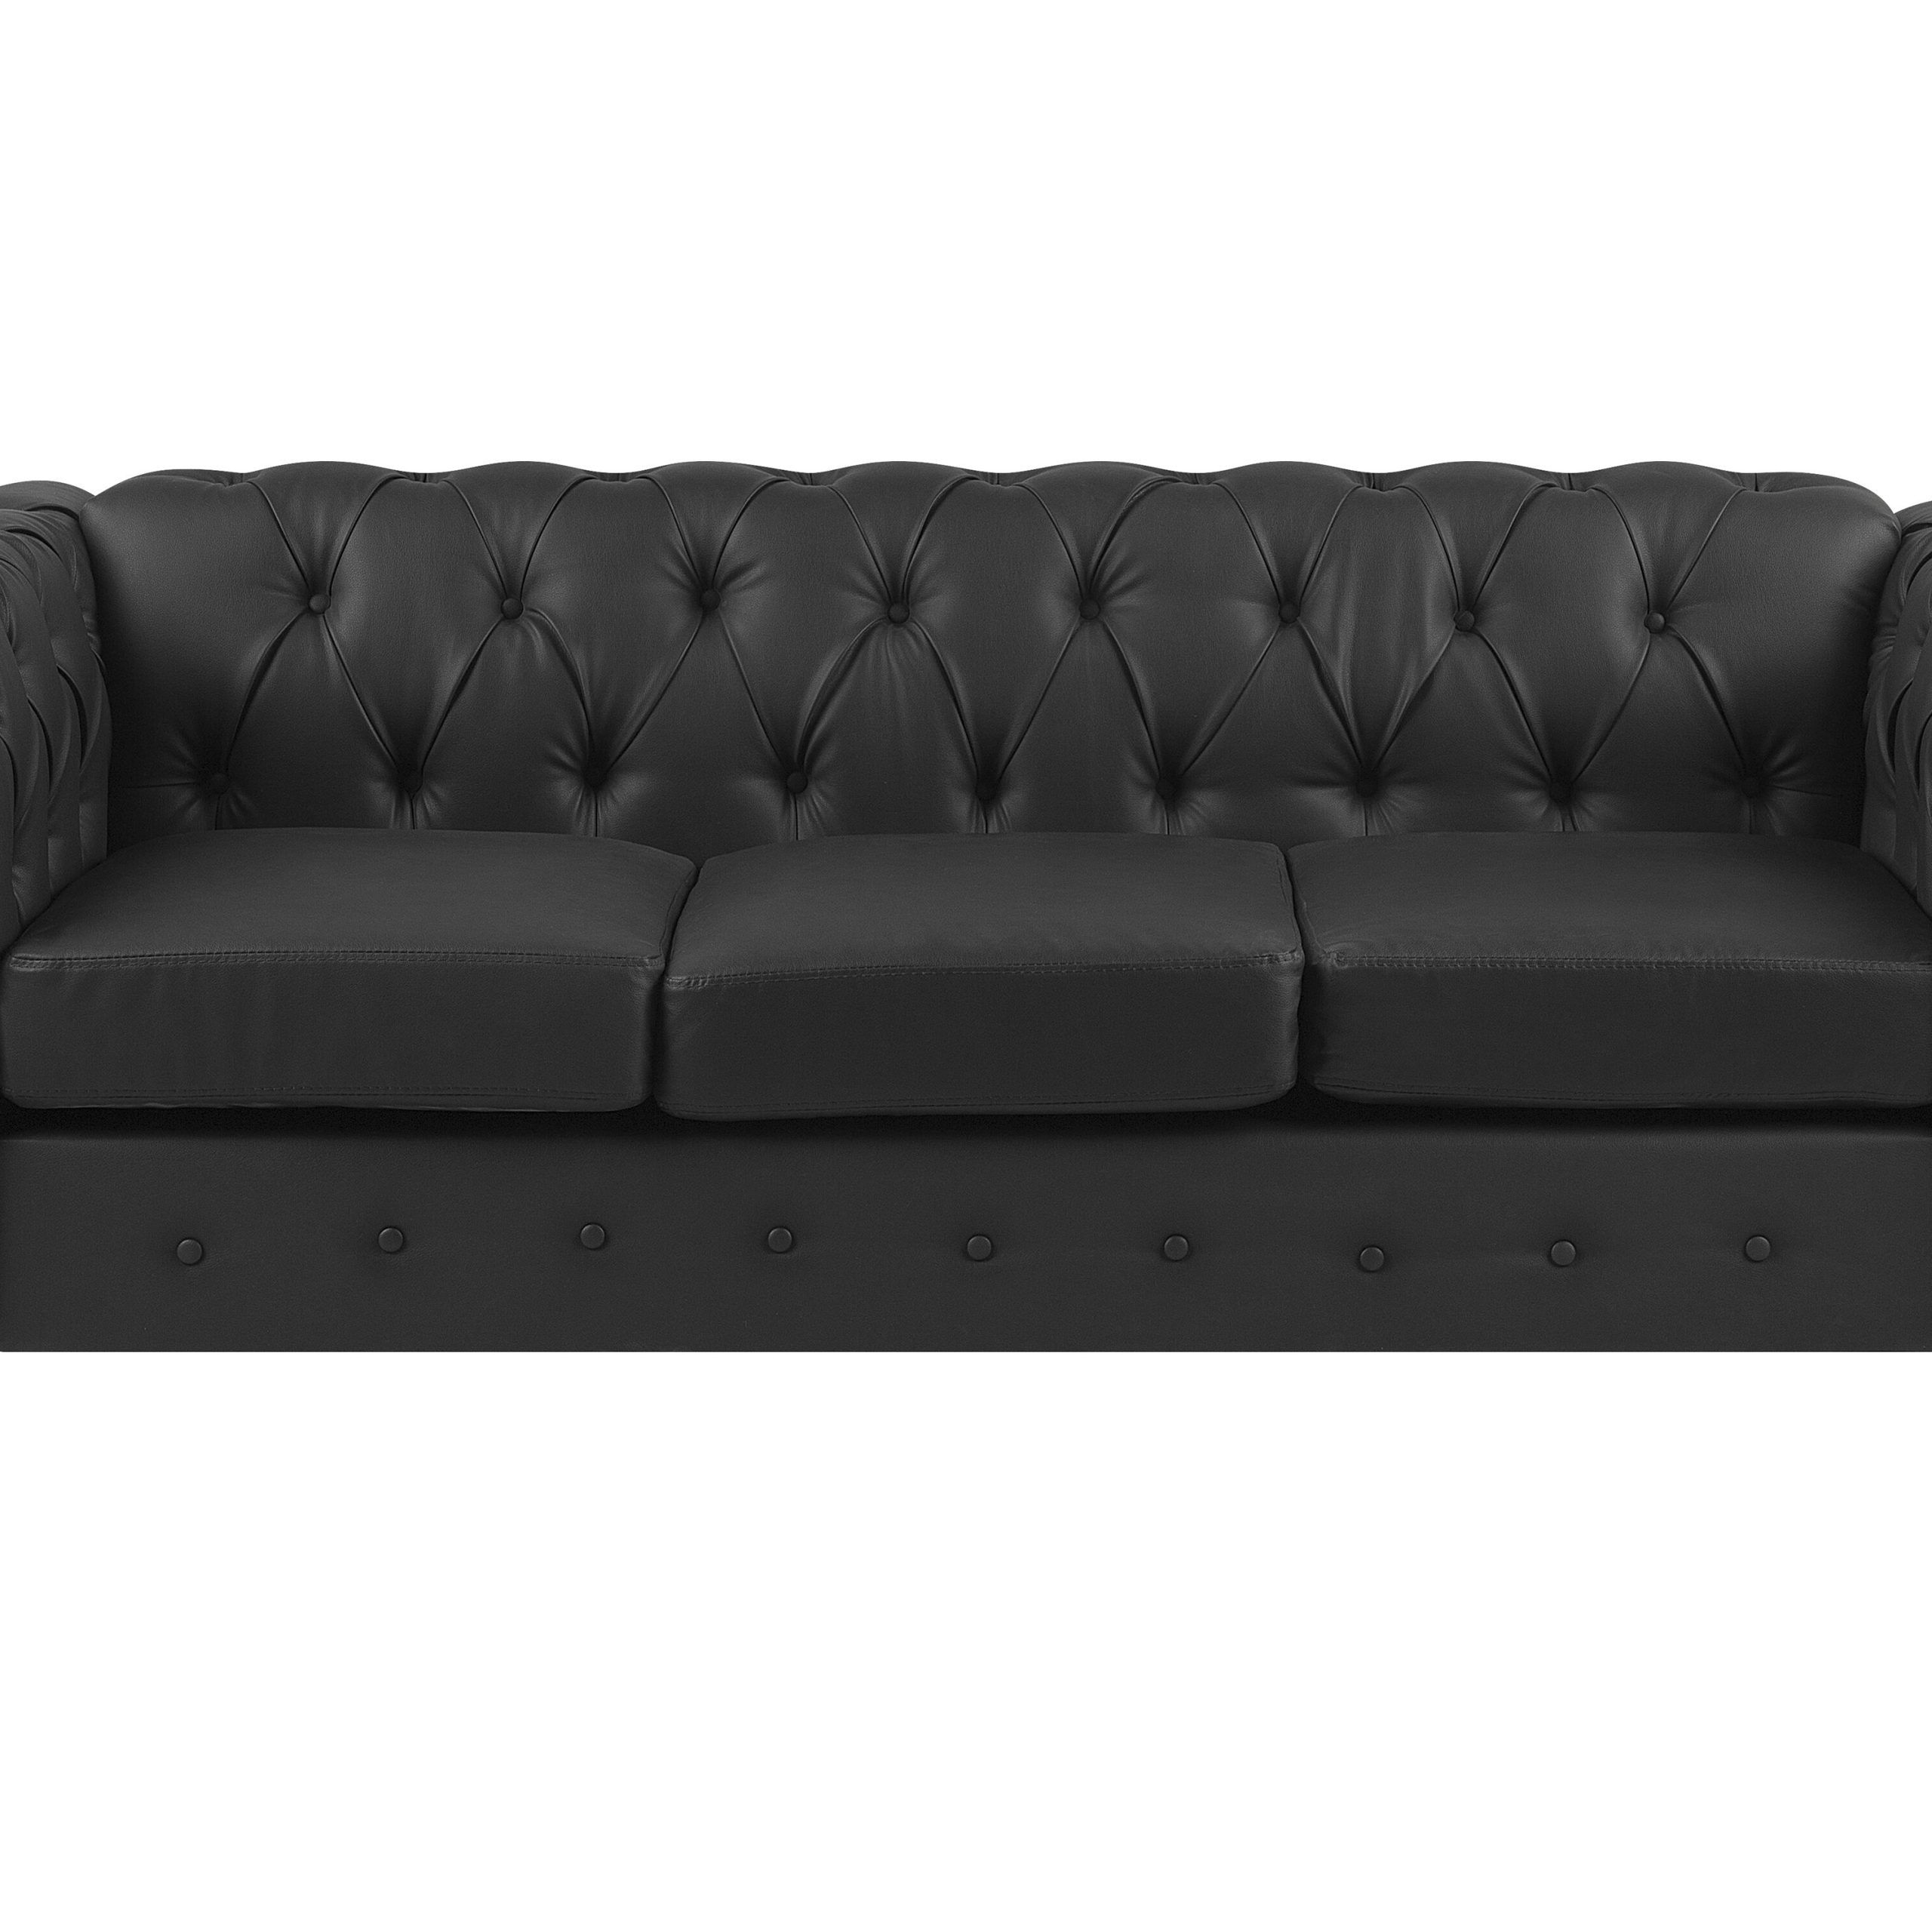 3 Seater Faux Leather Sofa Black Chesterfield | Beliani.it With Traditional 3 Seater Faux Leather Sofas (Gallery 12 of 20)